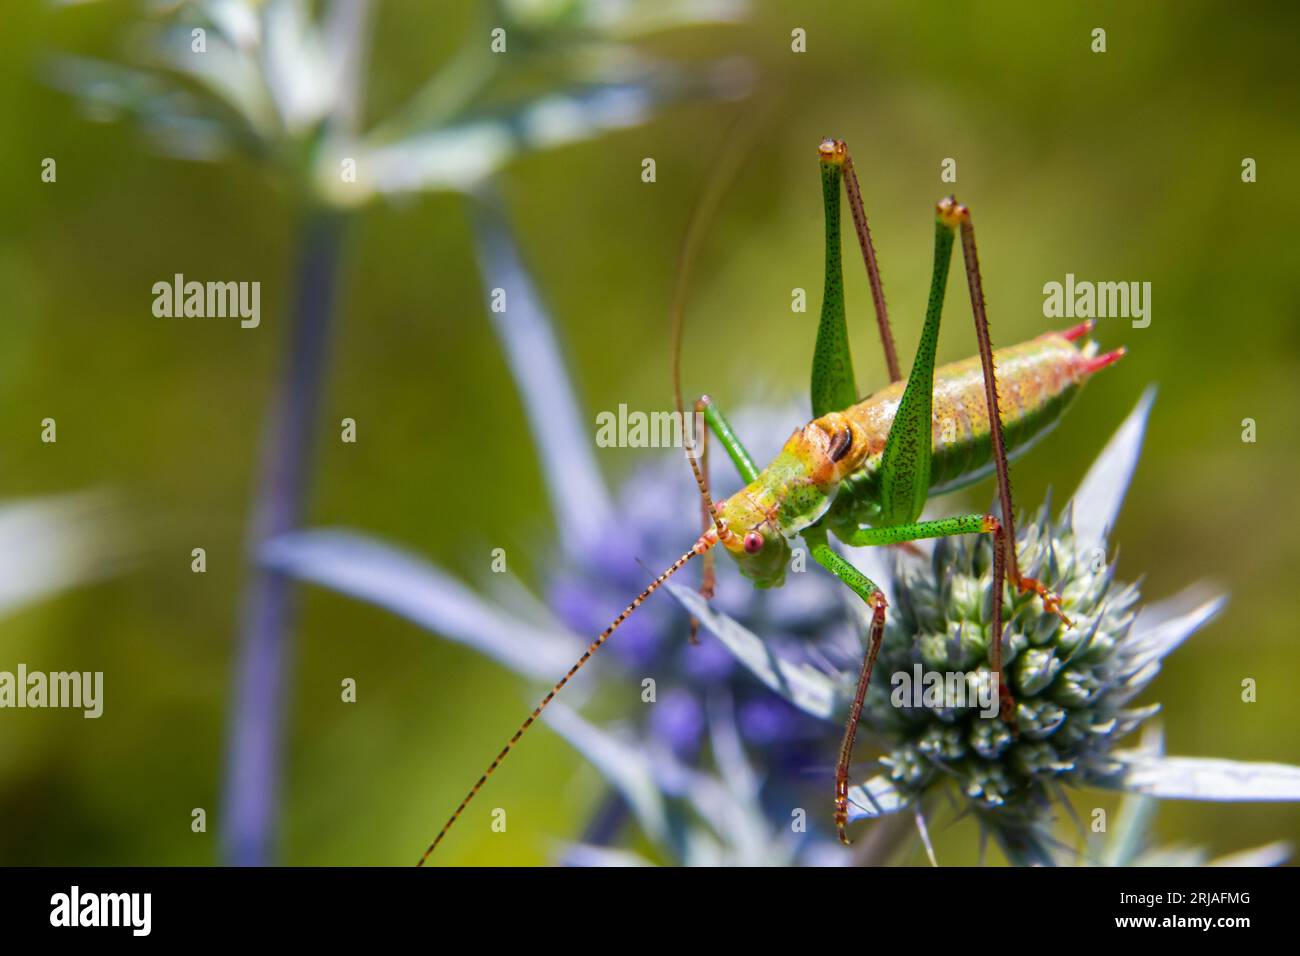 green grasshopper with black, green and white stripes on his back, sitting on a blue thistle amethyst eryngo flower - Eryngium amethystinum. close up Stock Photo